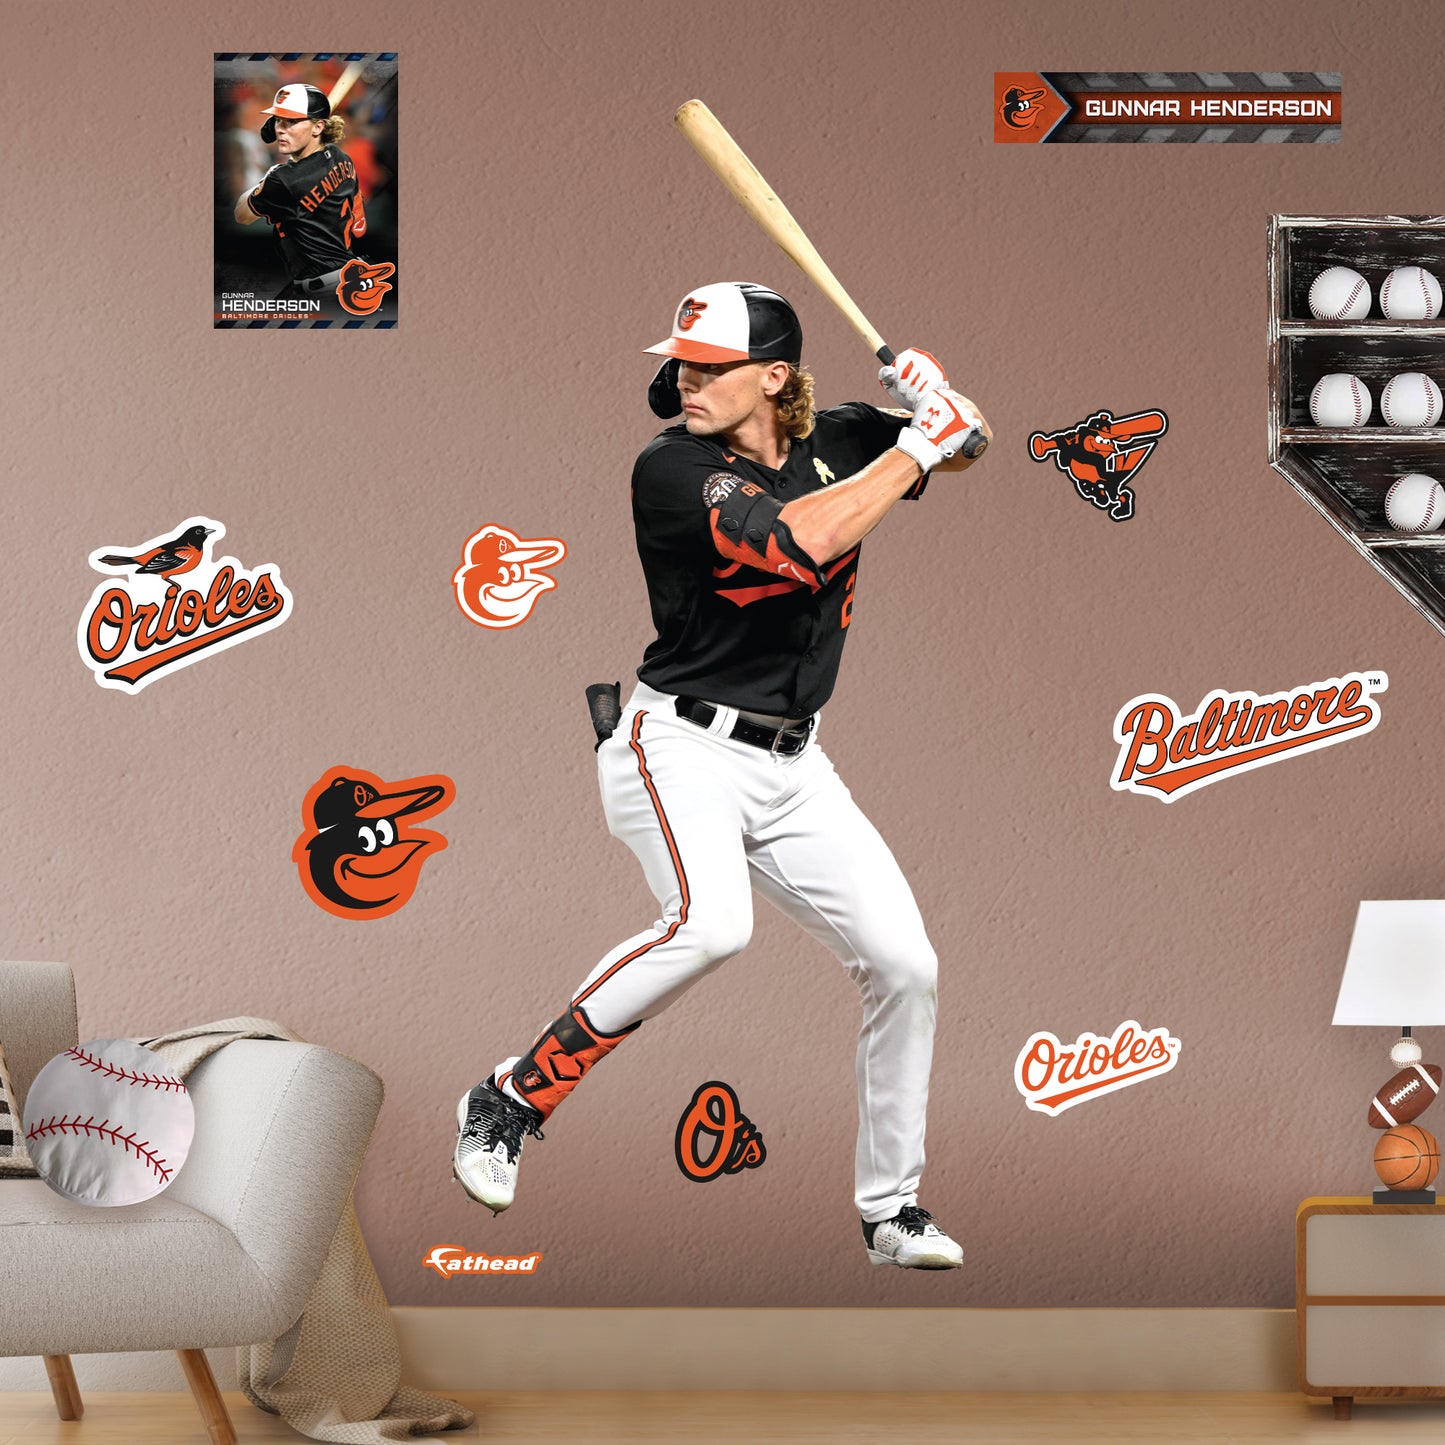 Baltimore Orioles: Gunnar Henderson         - Officially Licensed MLB Removable     Adhesive Decal